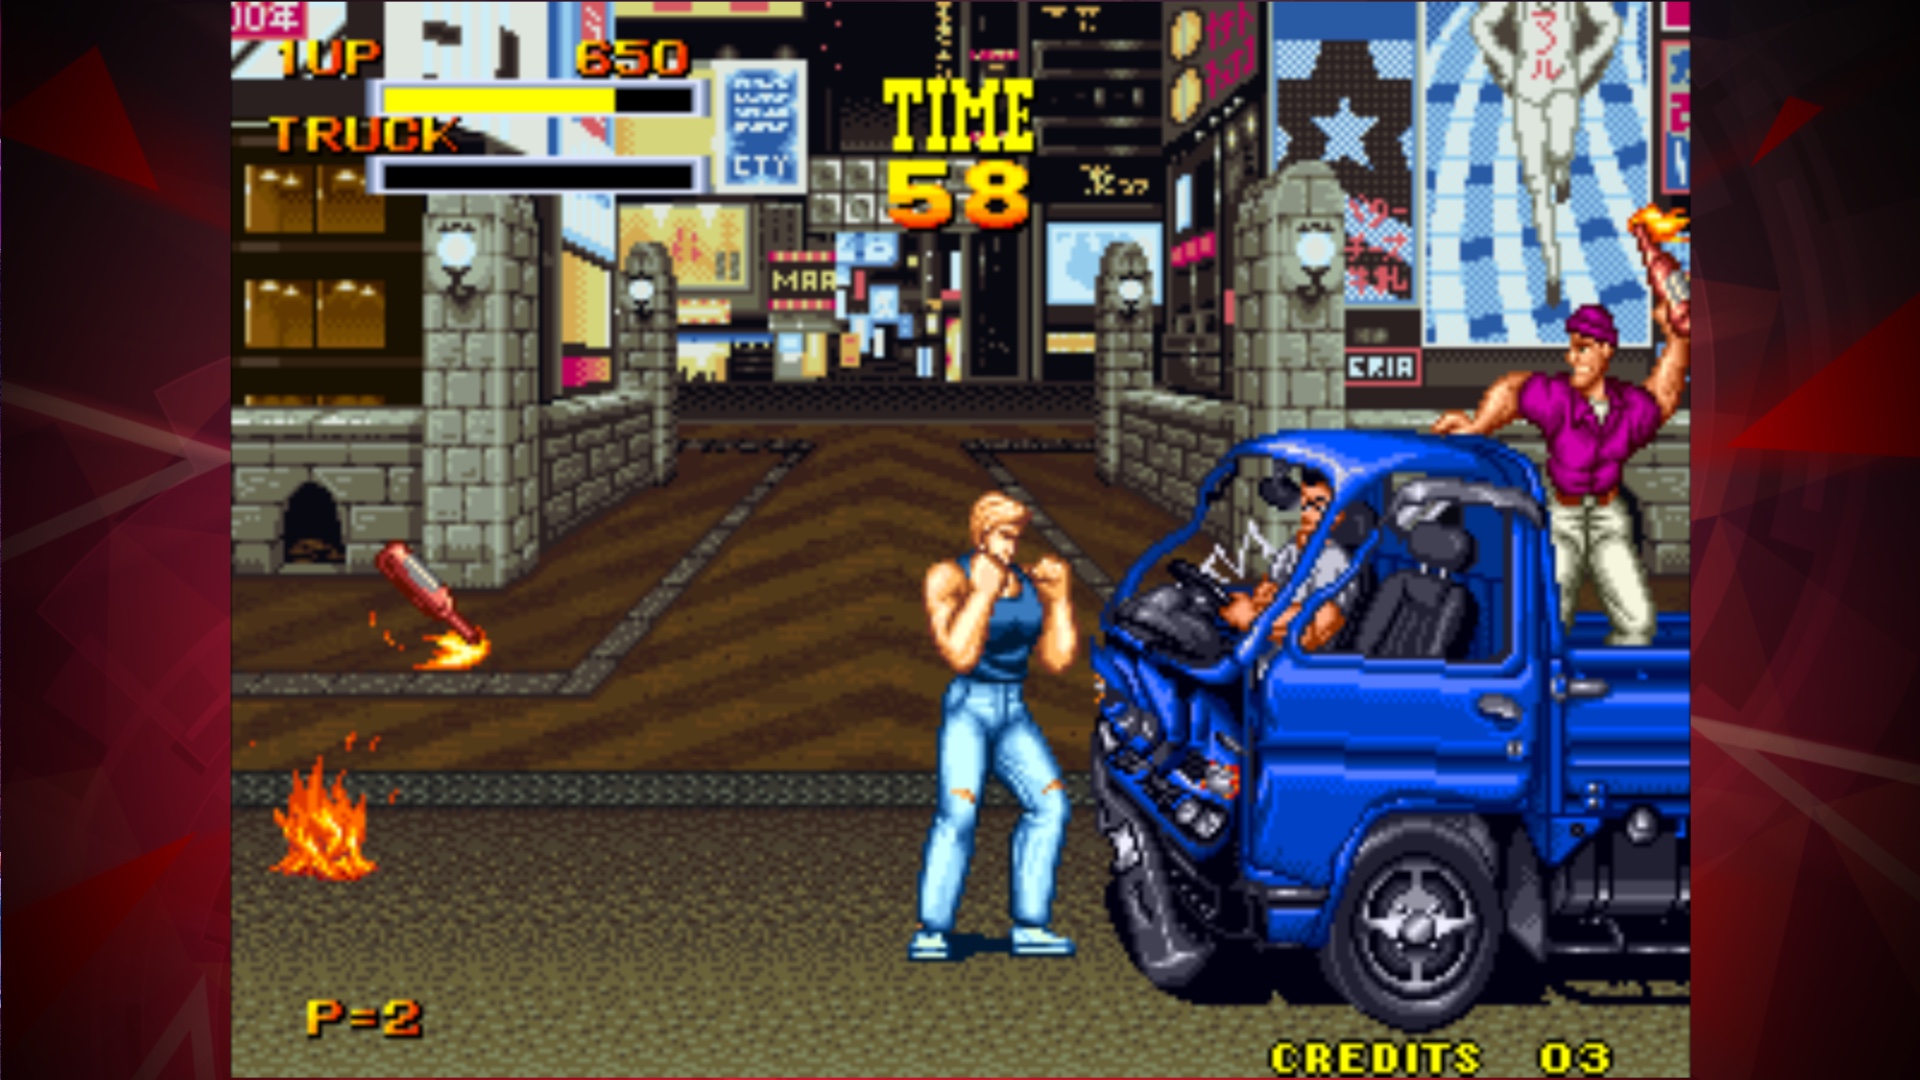 Action Game ‘Burning Fight’ From SNK and Hamster Is Out Now on iOS and Android As the Newest ACA NeoGeo Series Release